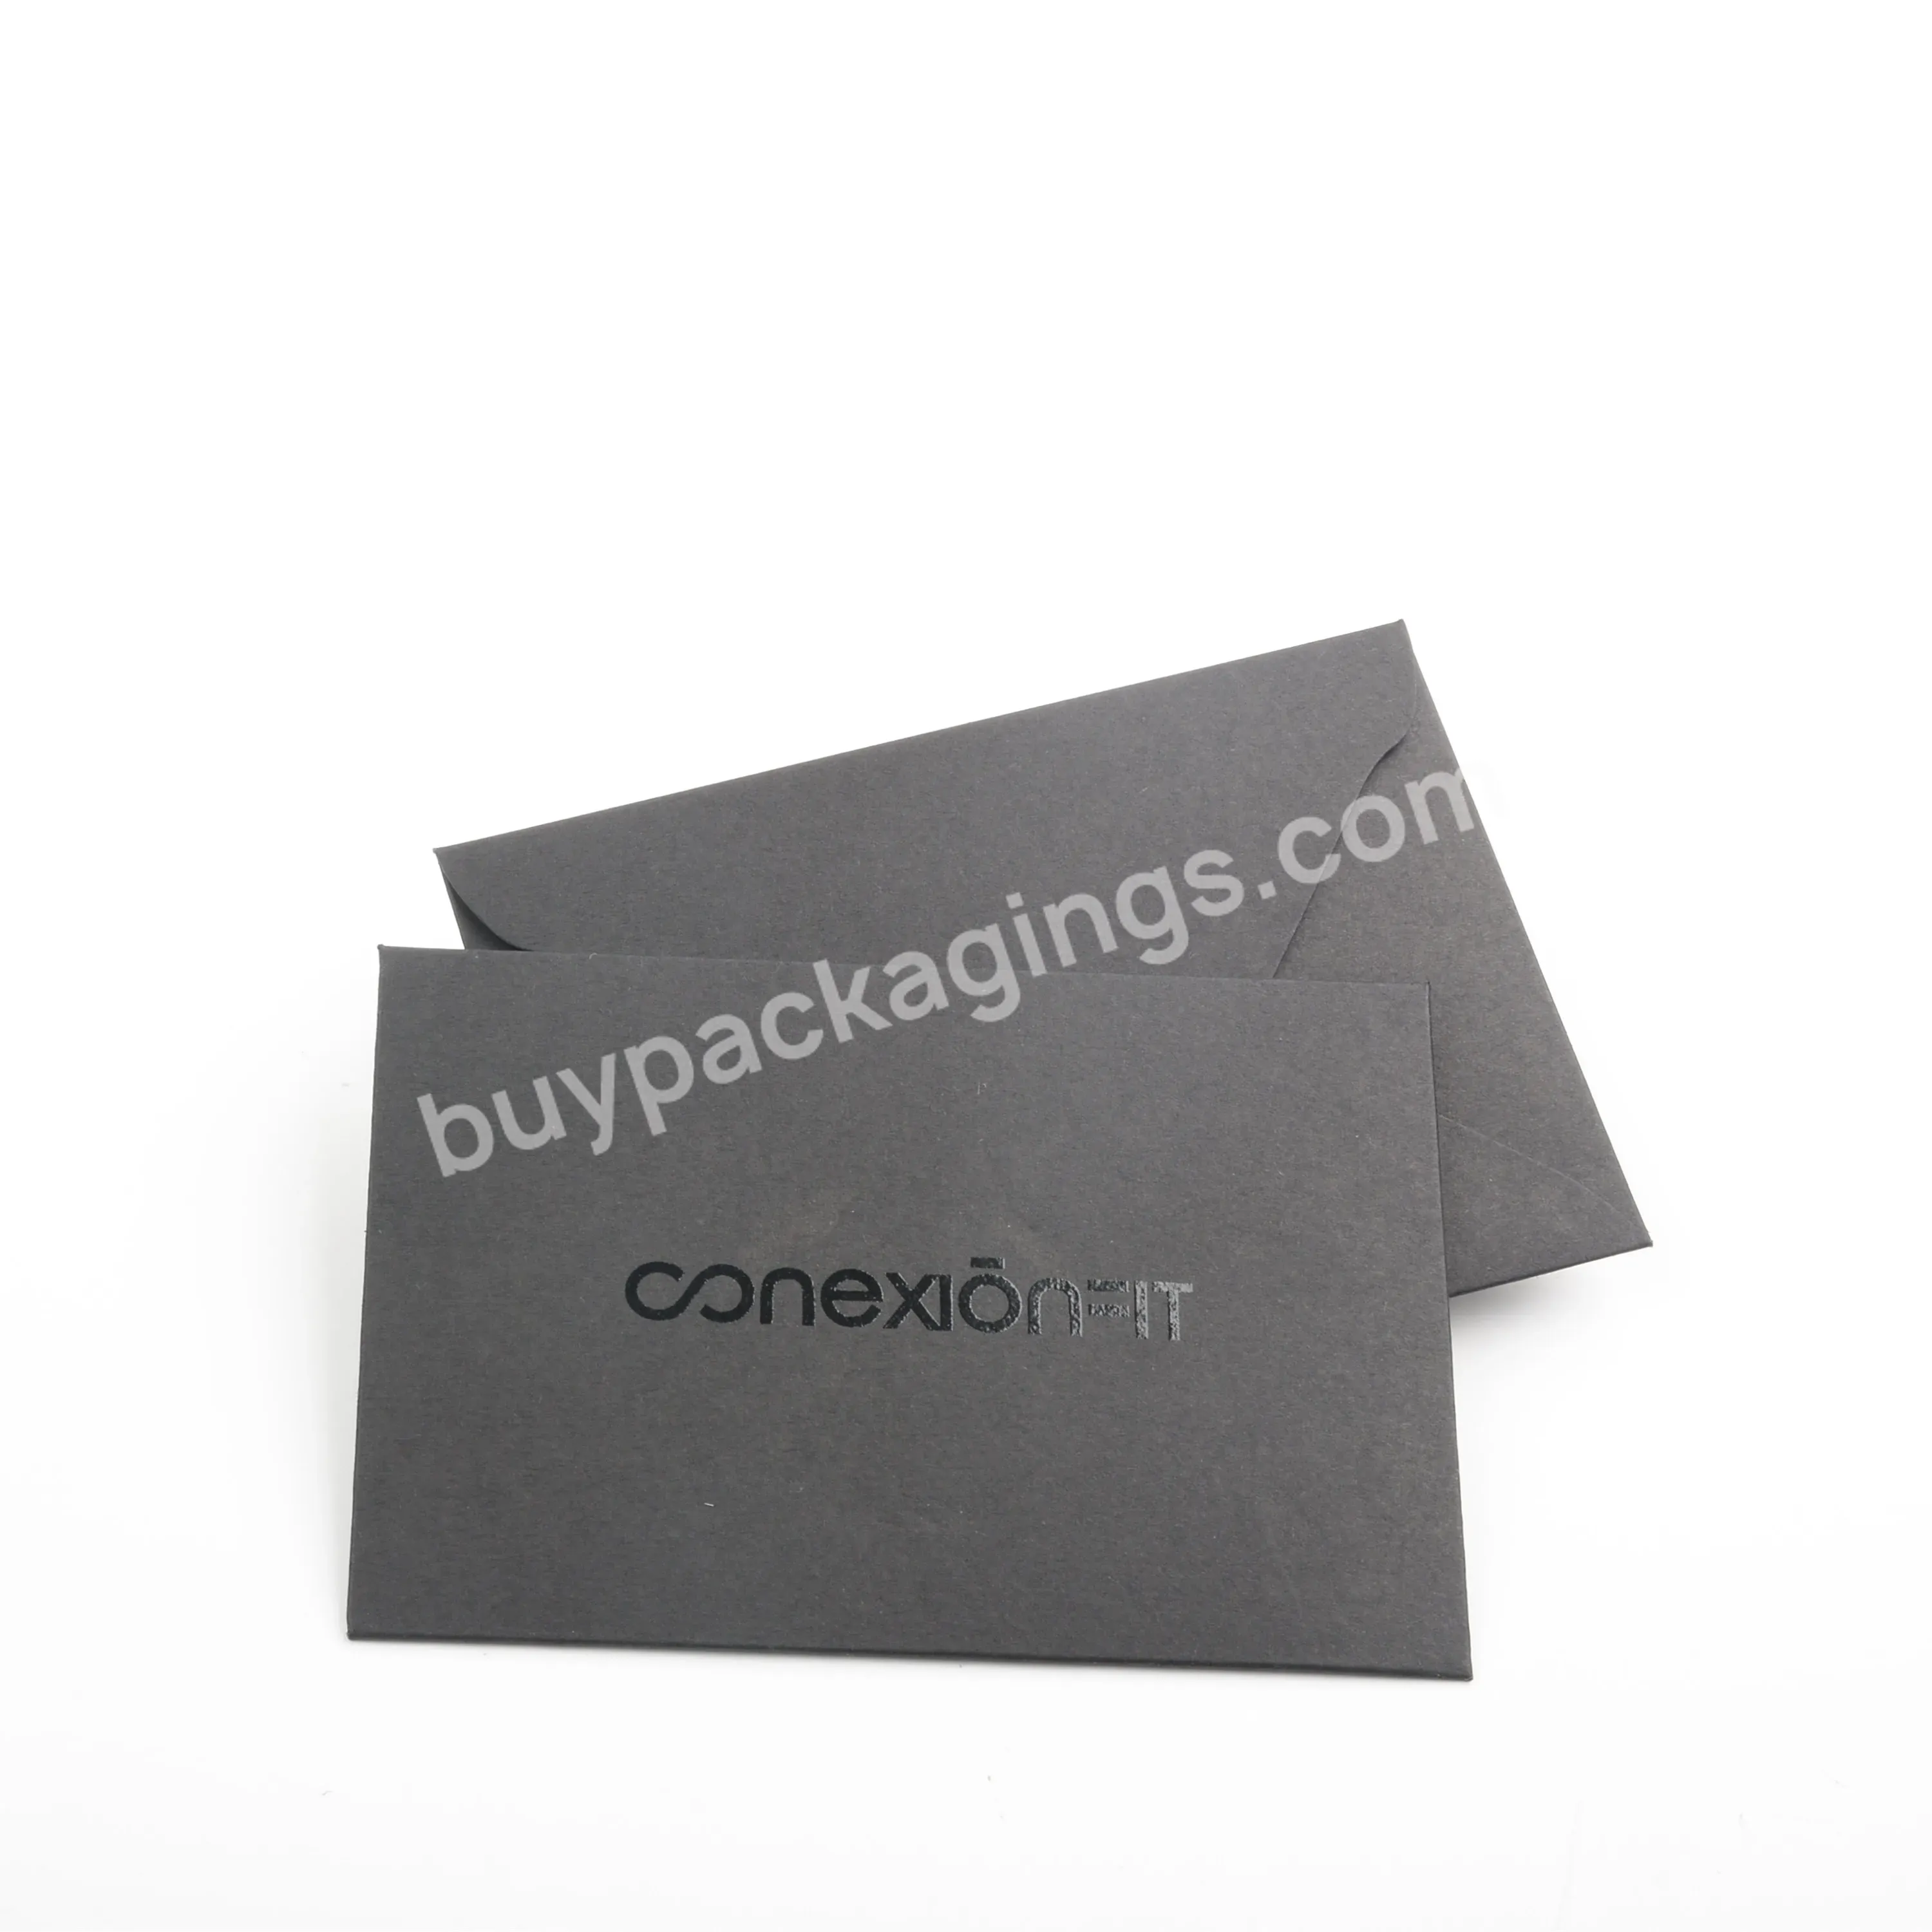 New Product Thank You Cards 100 Pieces Paper Card Envelopes With Envelopes For Friends - Buy 100 Pieces Paper Card Envelopes,New Product Thank You Cards,Black Envelope.